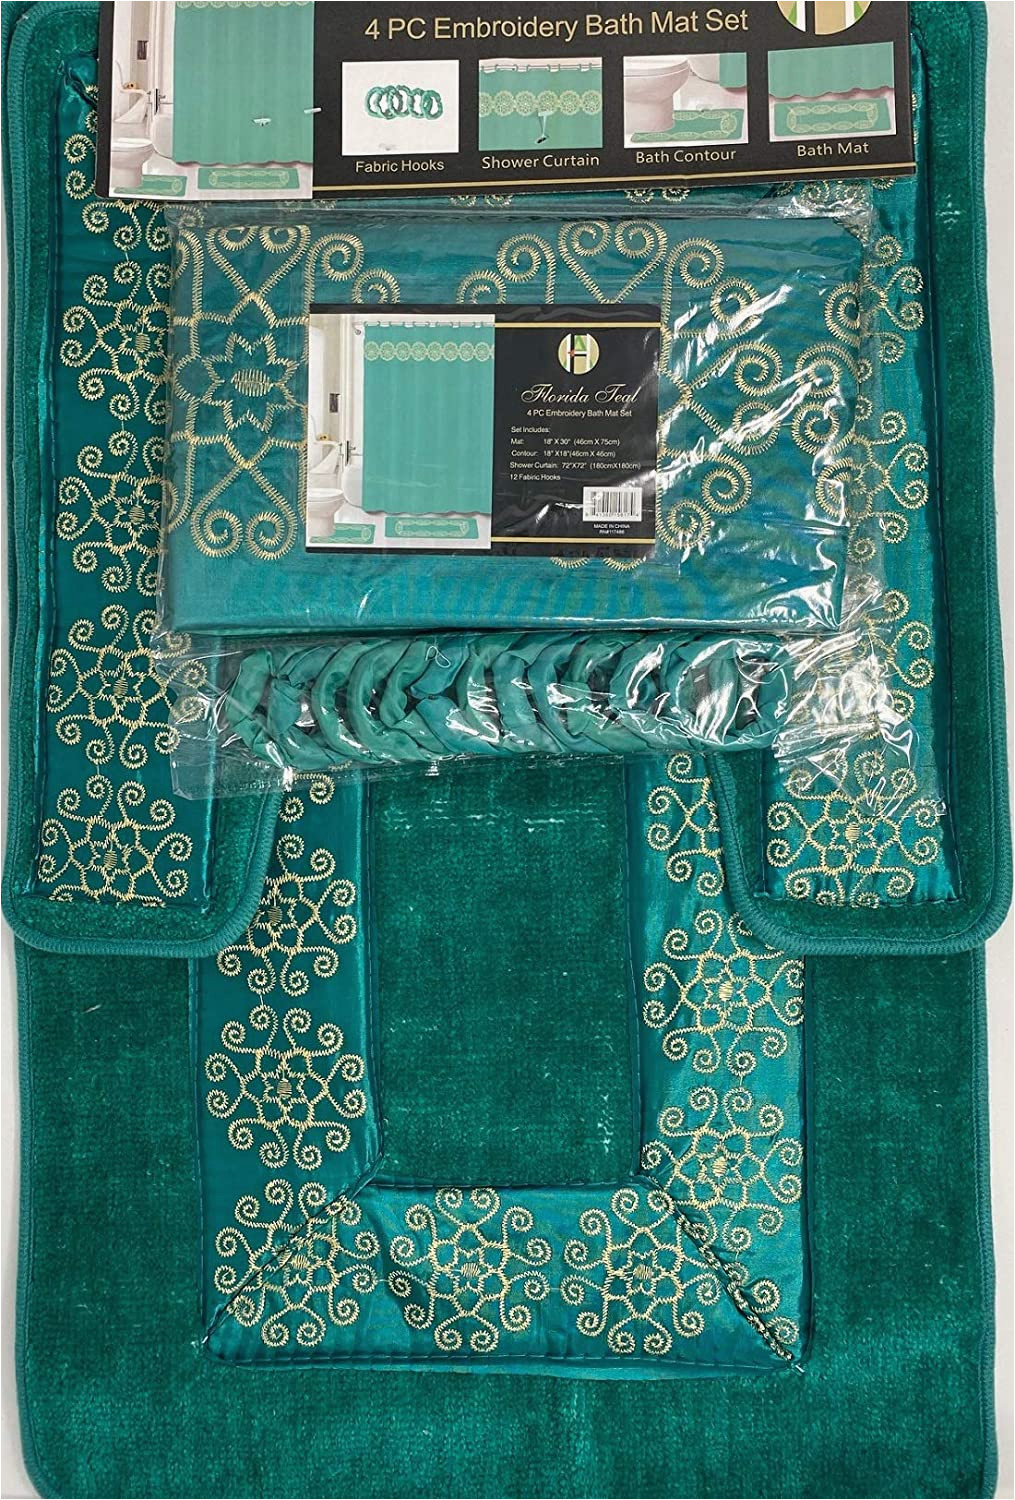 Aqua Bath Rug Sets 4 Piece Bathroom Rugs Set Non Slip Teal Gold Bath Rug toilet Contour Mat with Fabric Shower Curtain and Matching Rings Florida Teal